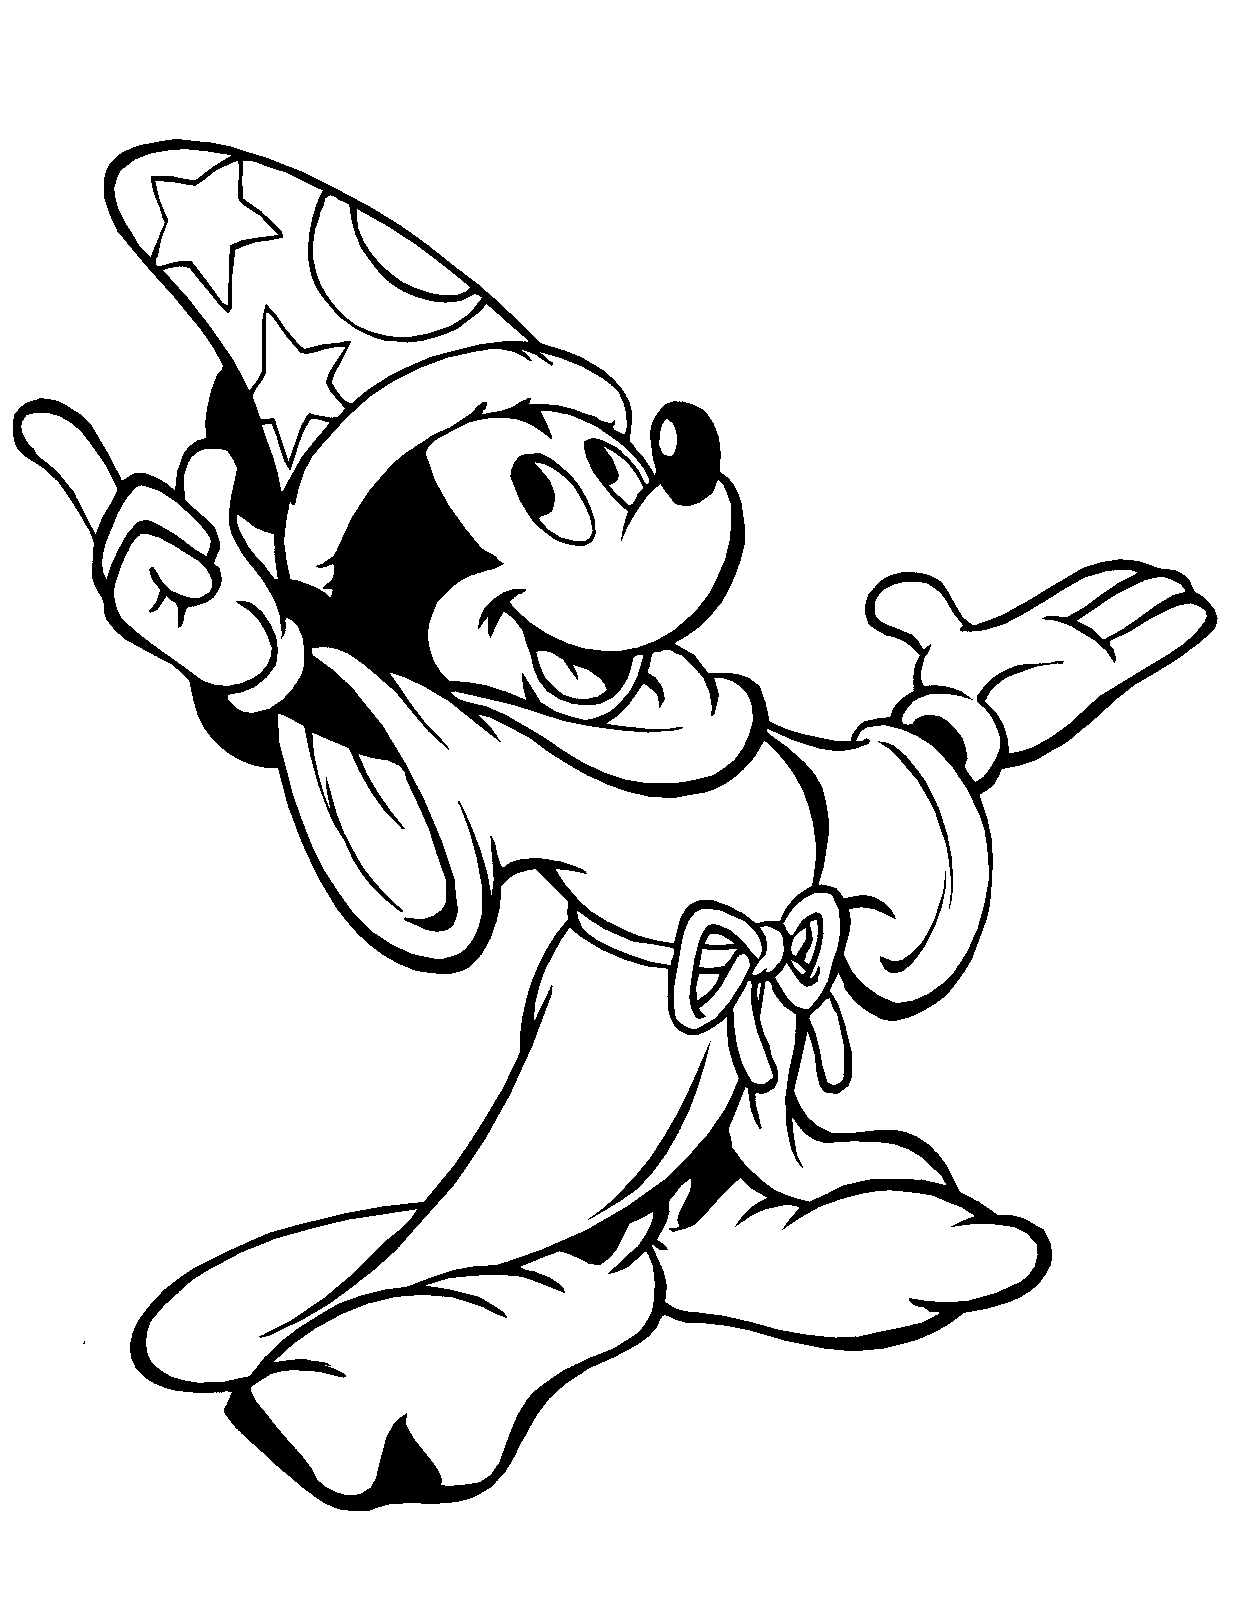 Mickey Mouse Coloring Pages and Book | UniqueColoringPages